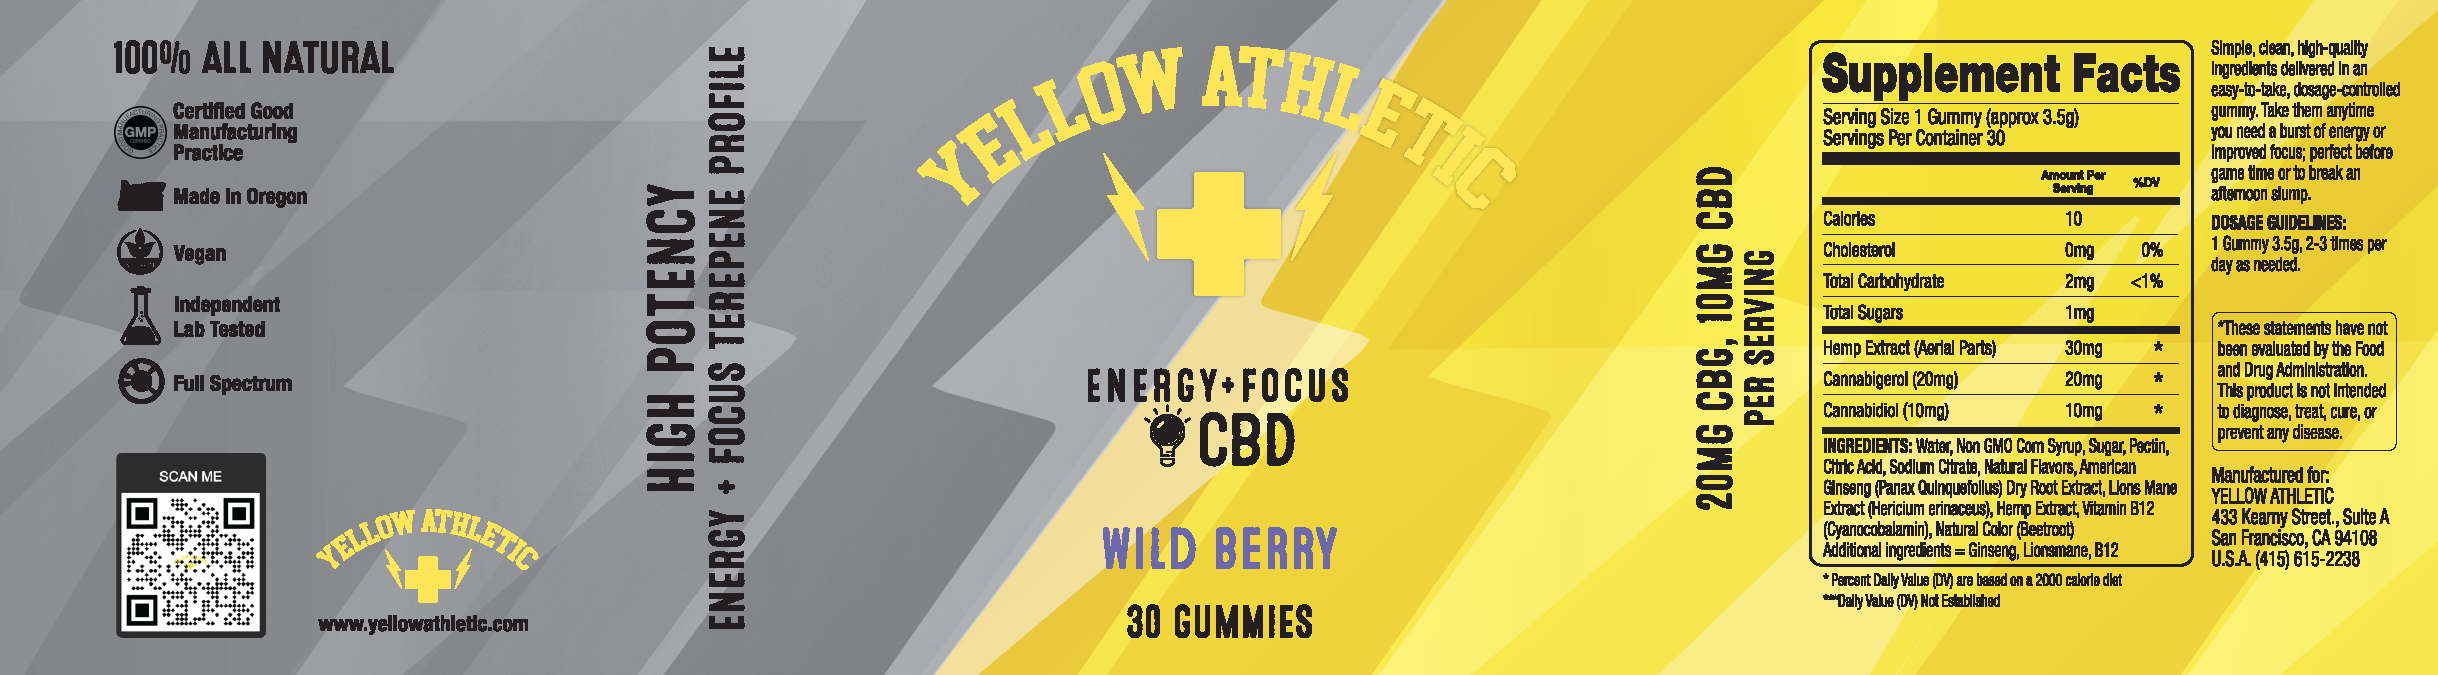 Anytime Recovery, Focus + Energy - CBD Gummies (30 count) Supplement Facts